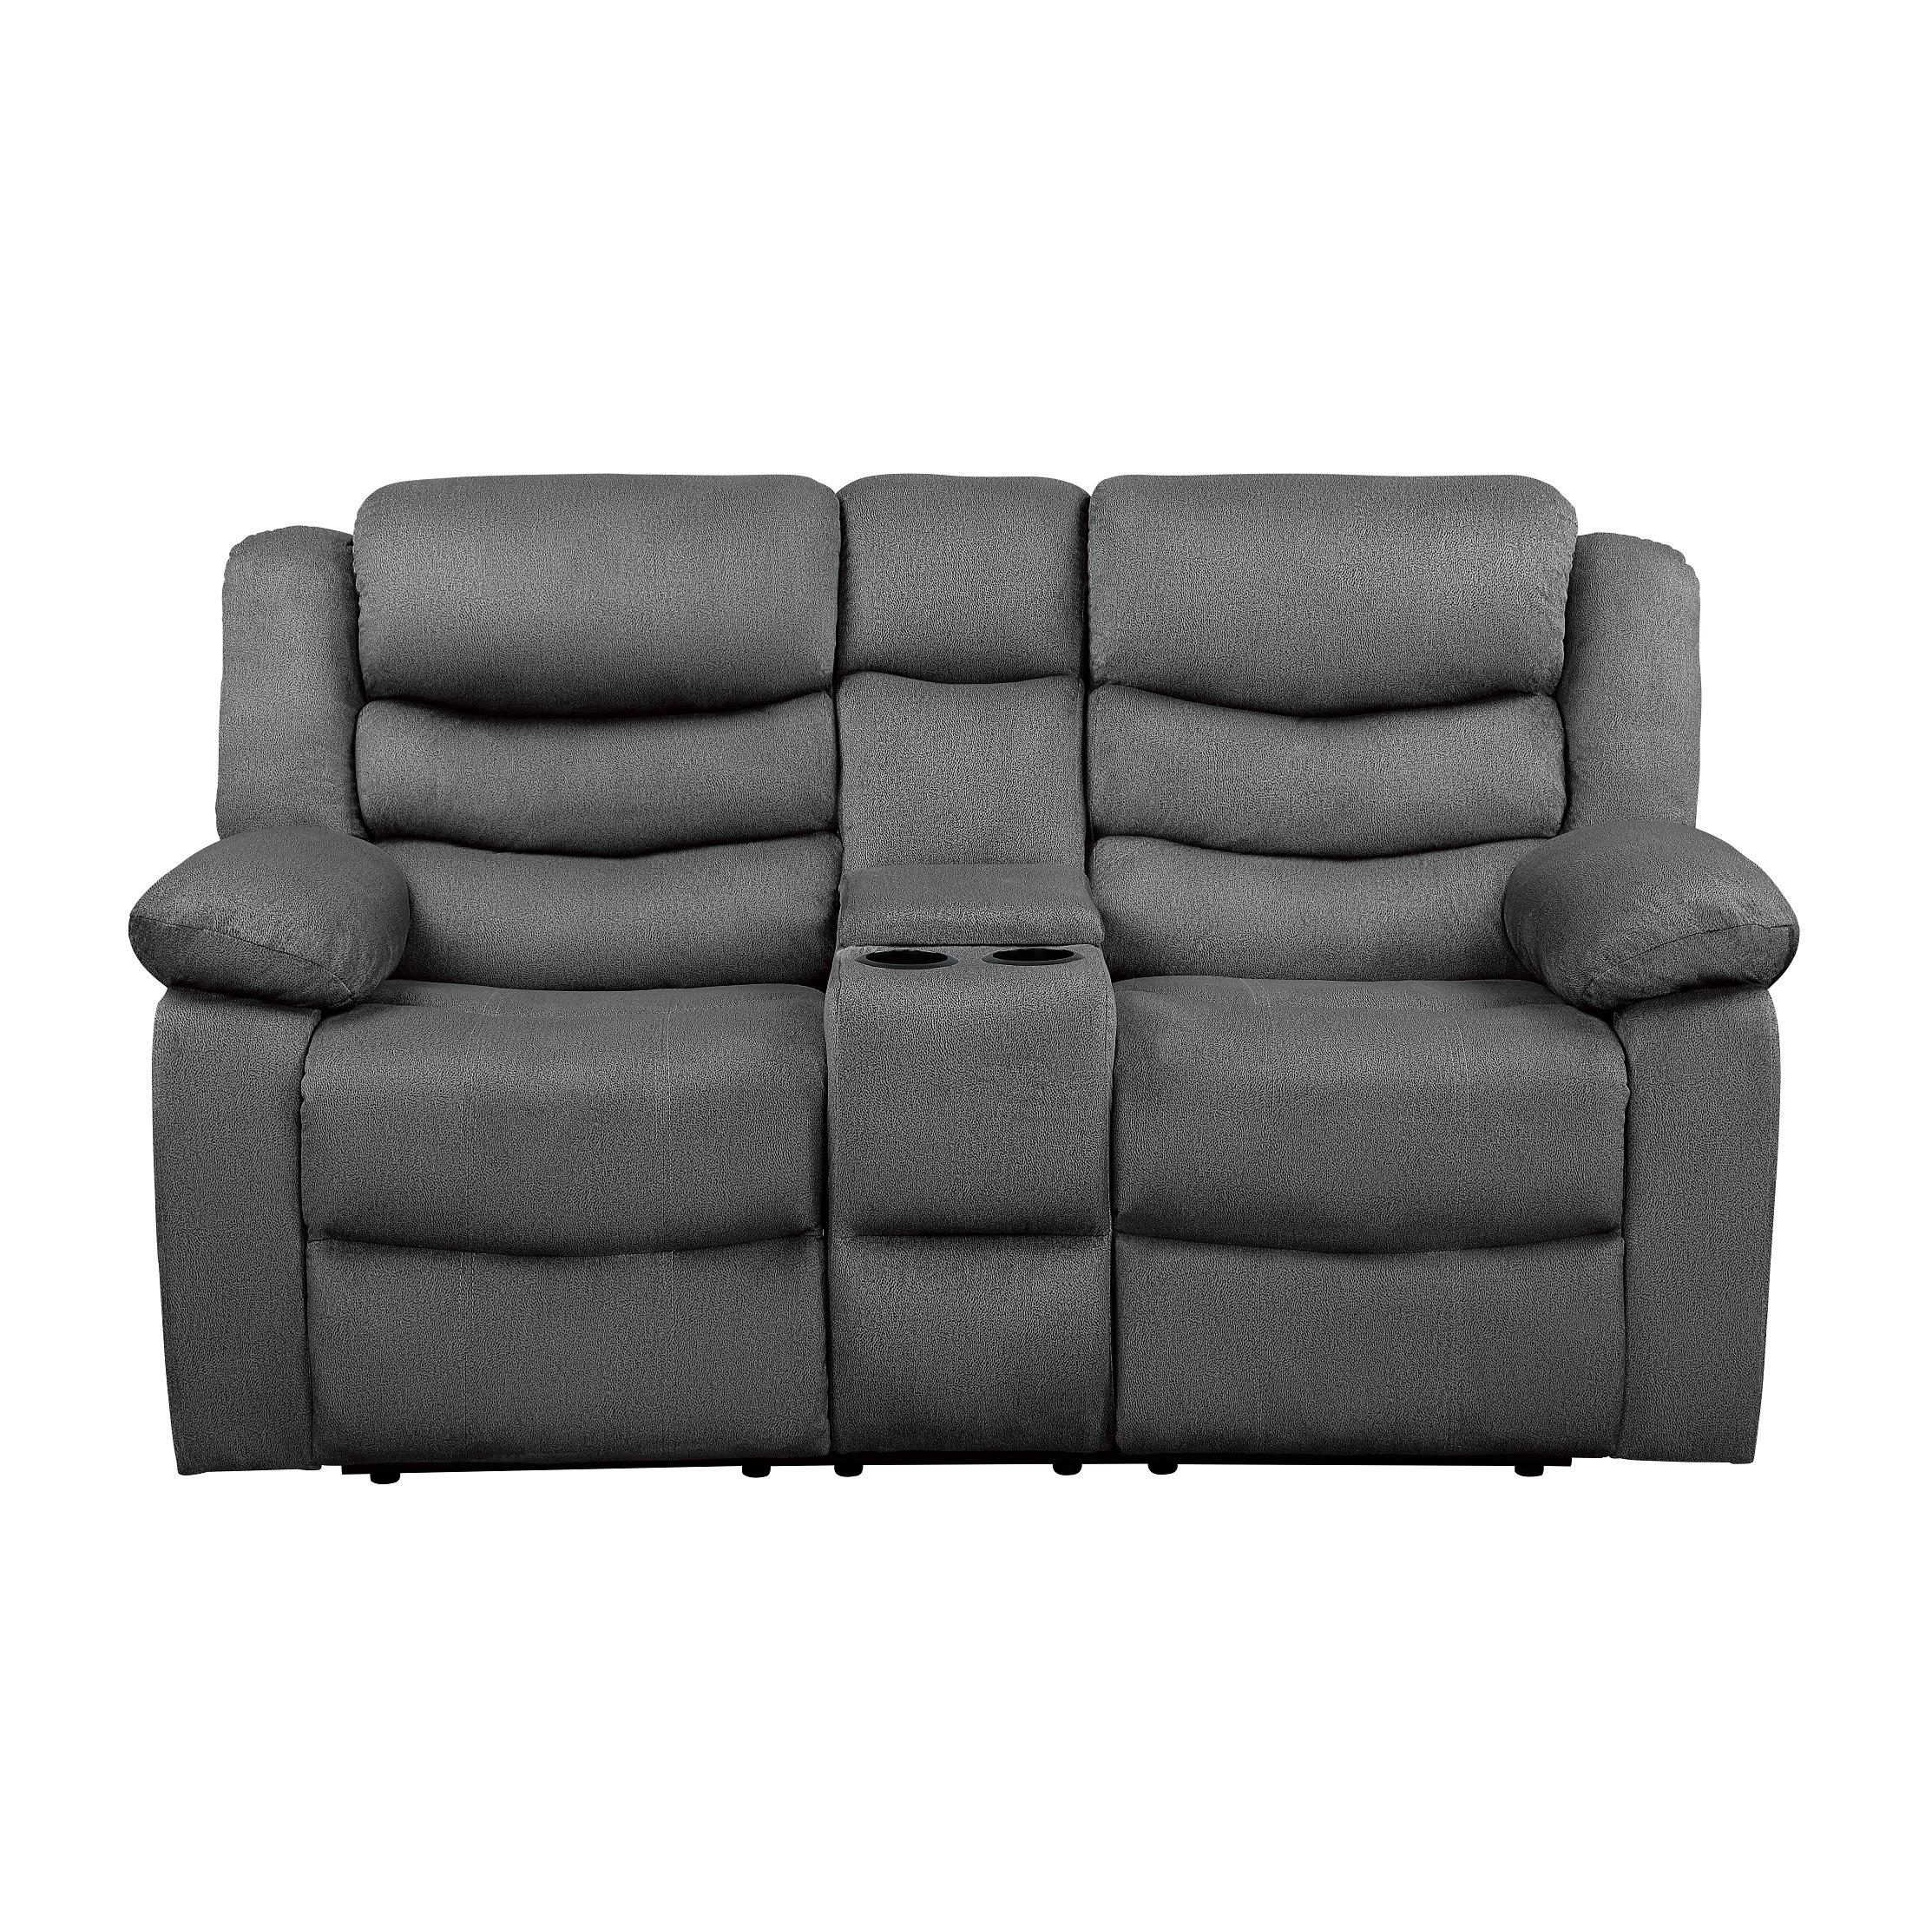 Transitional Reclining Loveseat 9526GY-2 Discus 9526GY-2 in Gray Microfiber